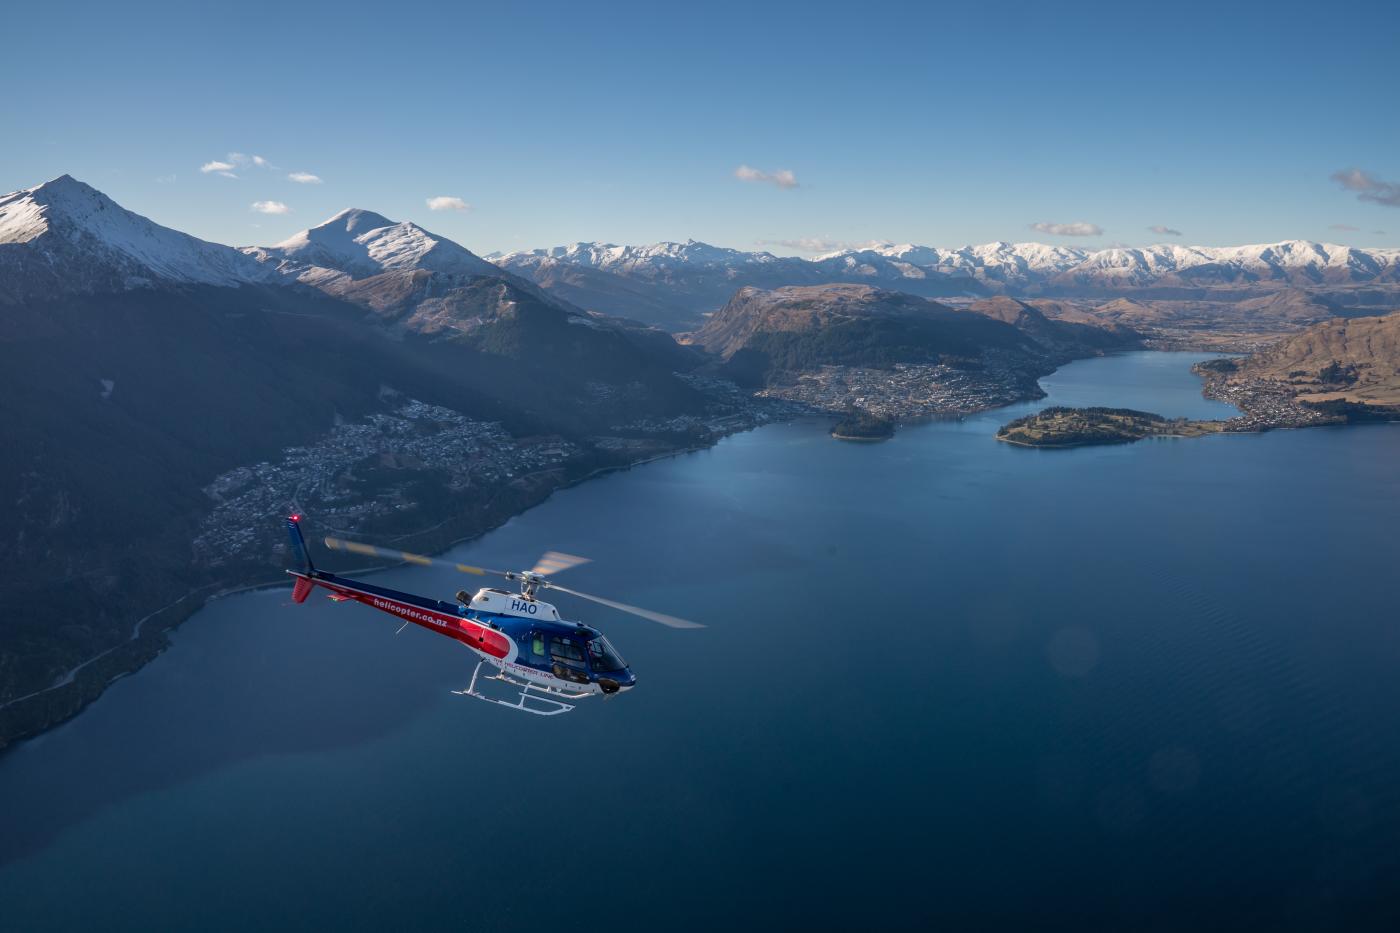 Scenic Heli Flight over Queenstown with views of snow-capped mountains and lake